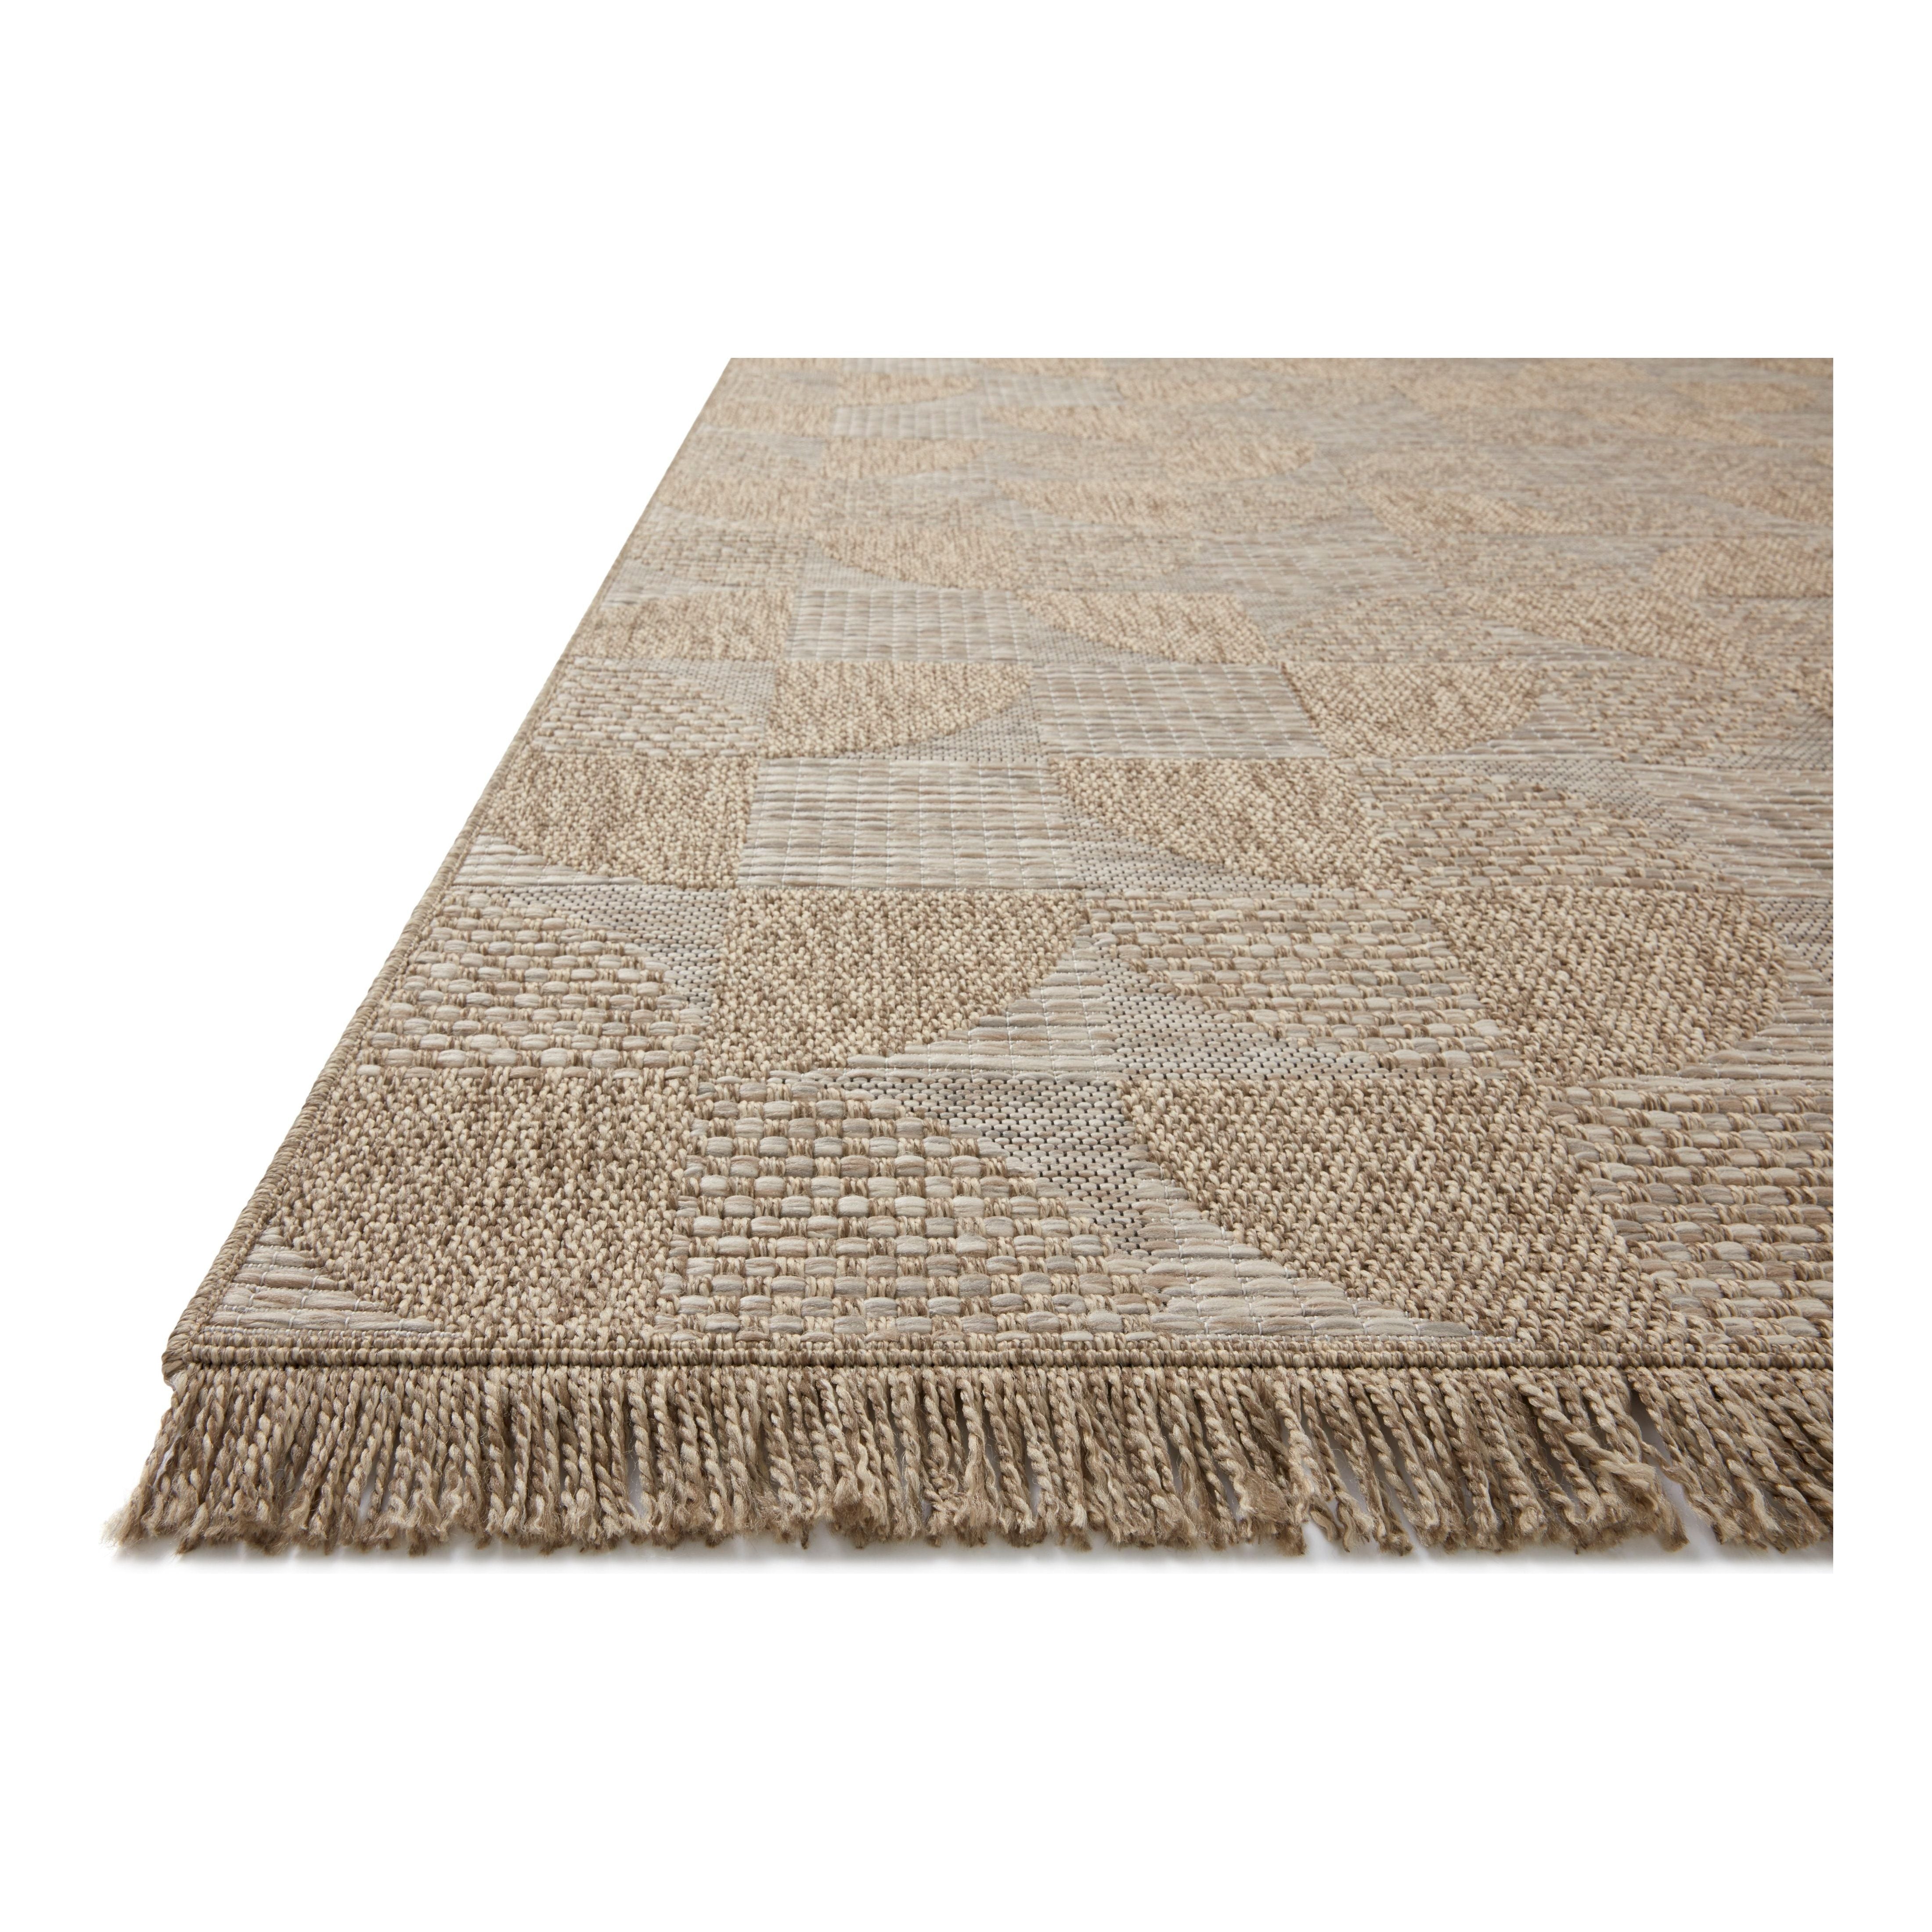 Made for sunny days ahead, the Dawn Collection is an indoor/outdoor rug that looks like a woven sisal rug but is power-loomed of 100% polypropylene, which makes it water- and mildew-resistant (so it's ready for rainy days ahead, too). Amethyst Home provides interior design, new home construction design consulting, vintage area rugs, and lighting in the Alpharetta metro area.